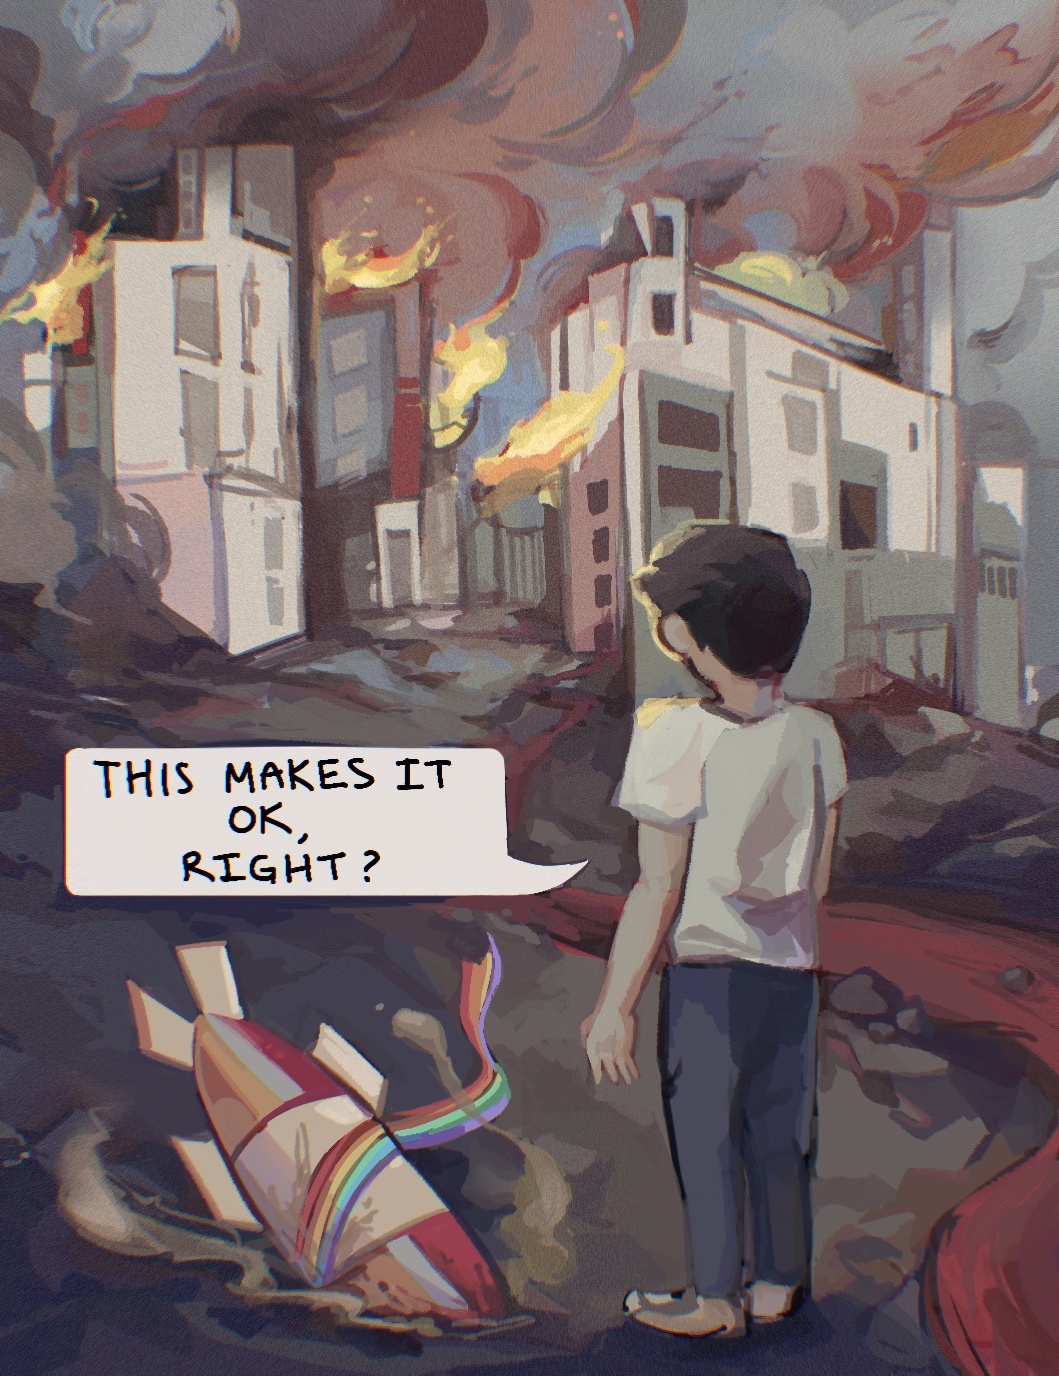 A digital illustration of a young masc person with tan skin and dark hair wearing a white shirt and blue jeans. They stand in front of a weapon rocket that has a rainbow ribbon tied around it. Behind them, a city is burning. They ask, "This makes it ok, right?"